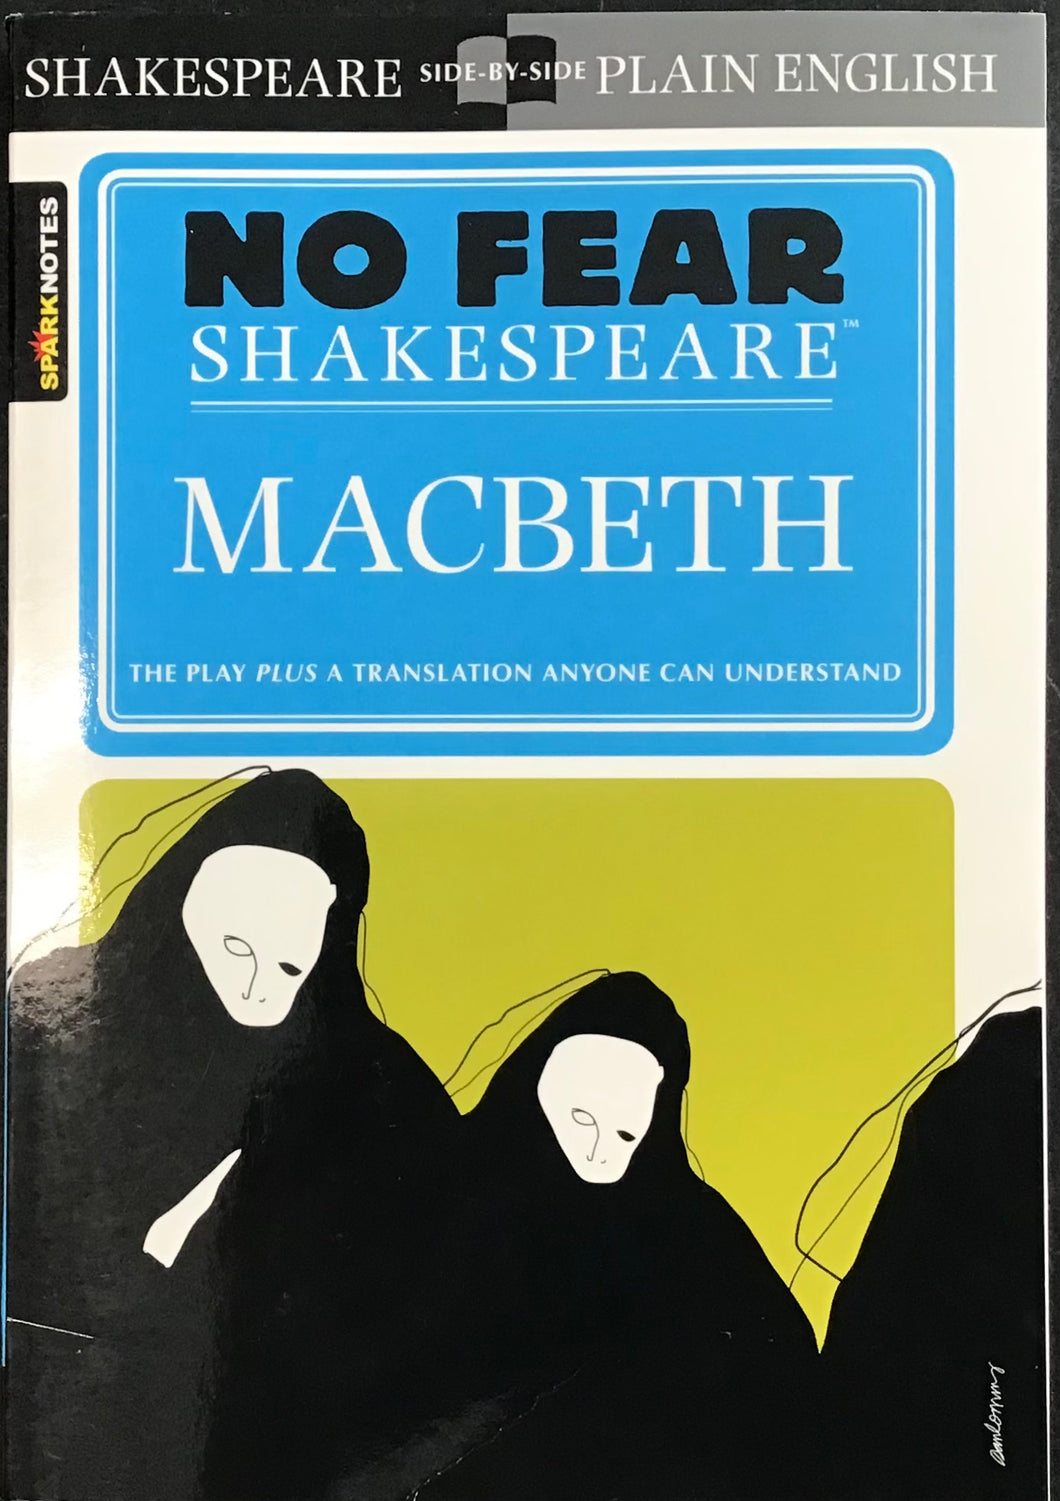 SPARK Notes: No Fear Shakespeare: Macbeth by William Shakespeare